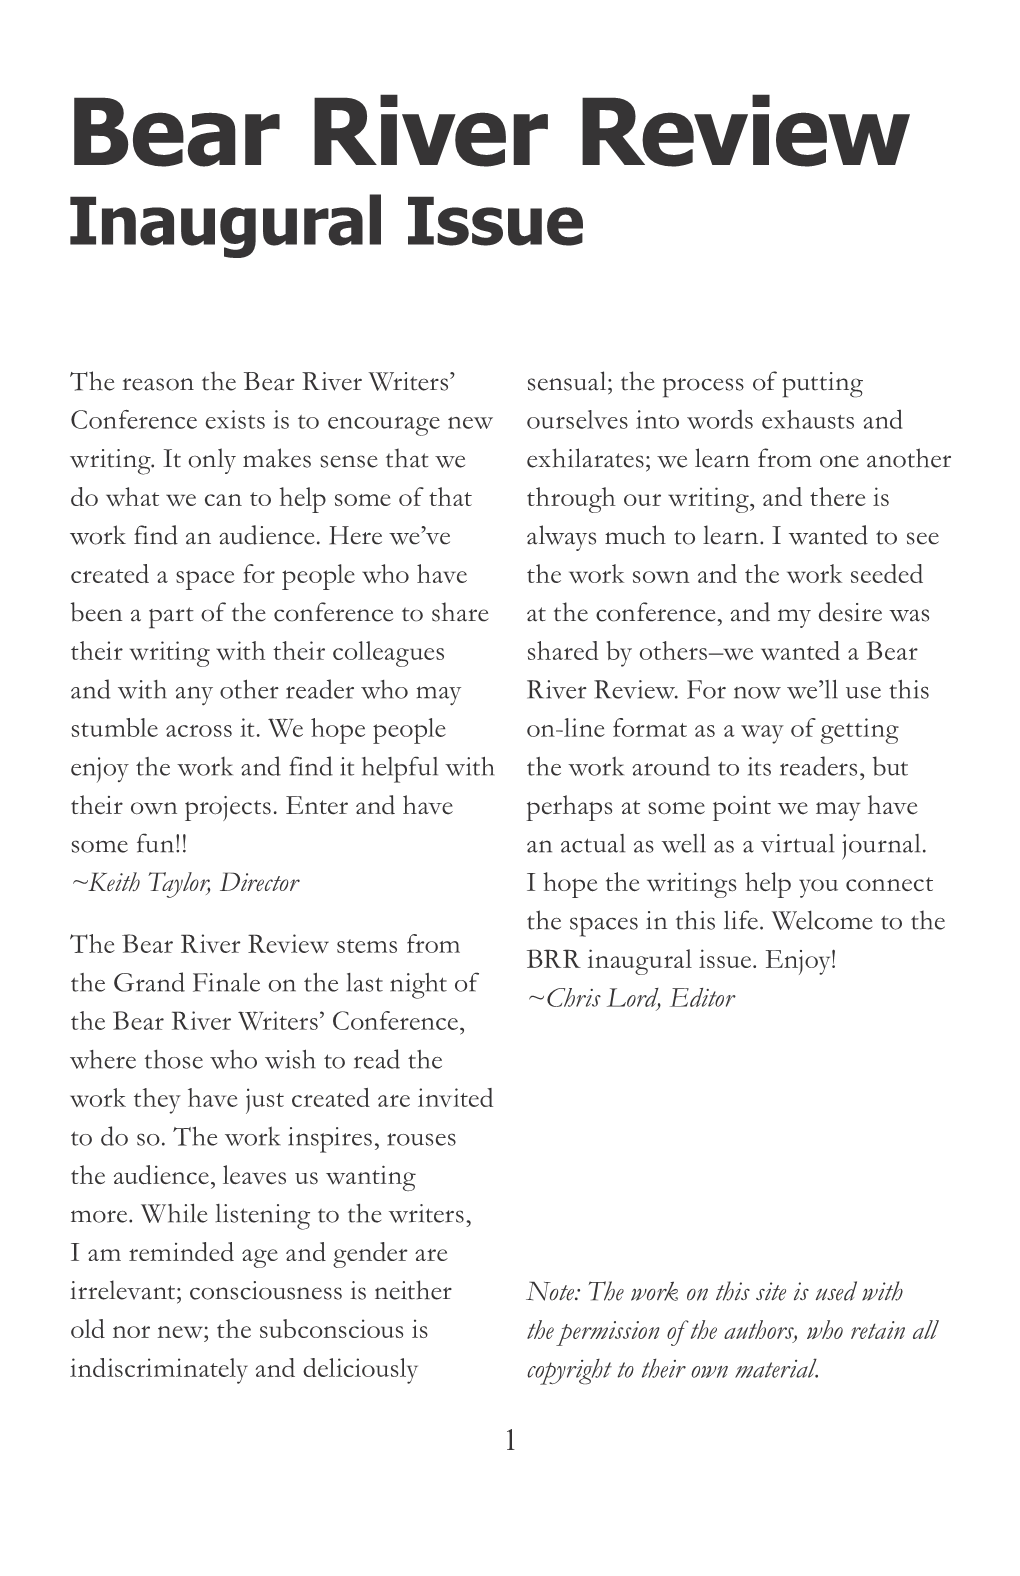 Bear River Review Inaugural Issue